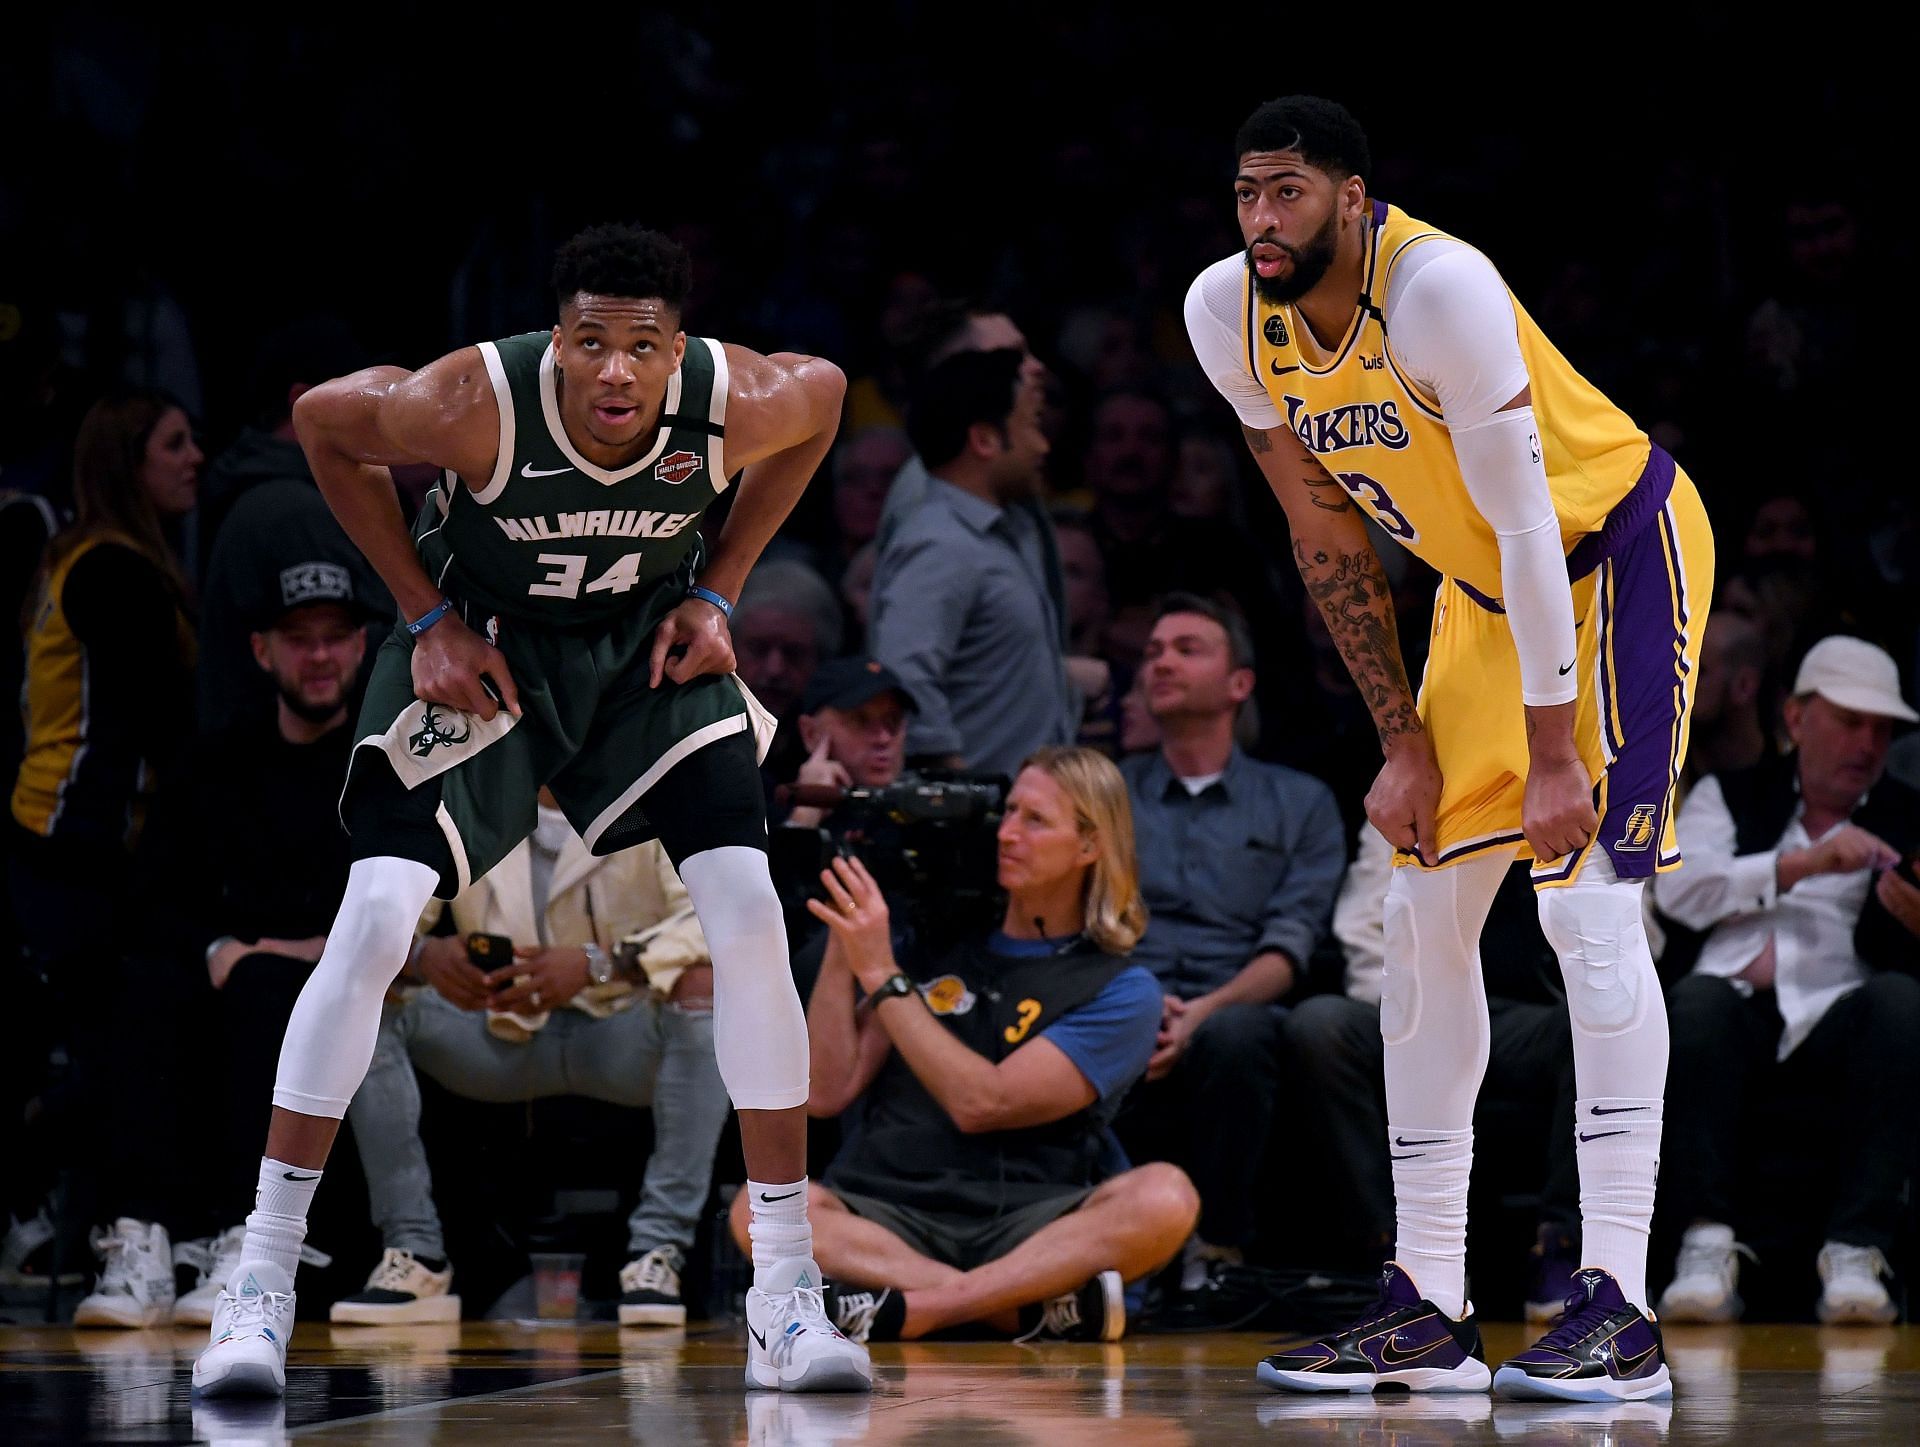 The Milwaukee Bucks and the LA Lakers will face off at the Fiserv Forum Arena on Wednesday